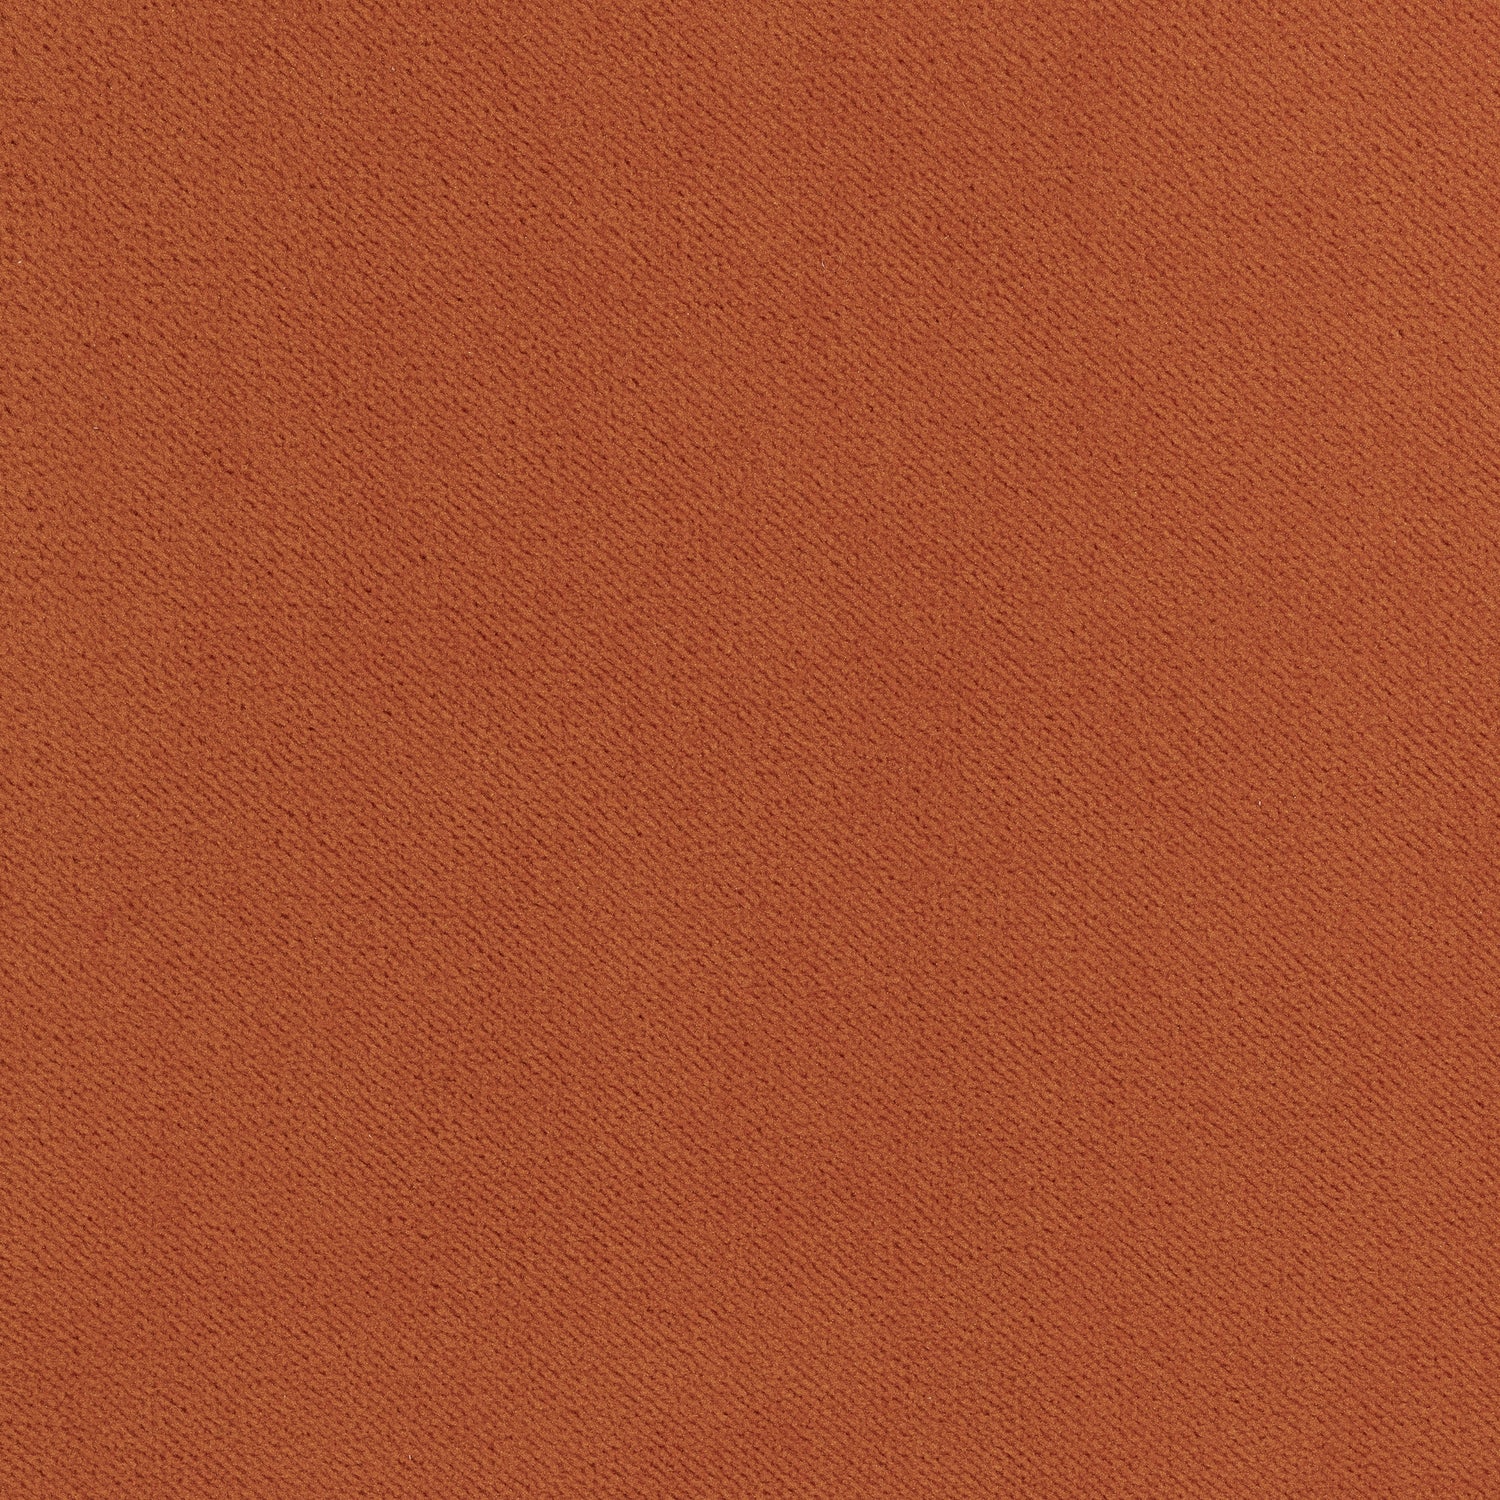 Club Velvet fabric in terra cotta color - pattern number W7203 - by Thibaut in the Club Velvet collection